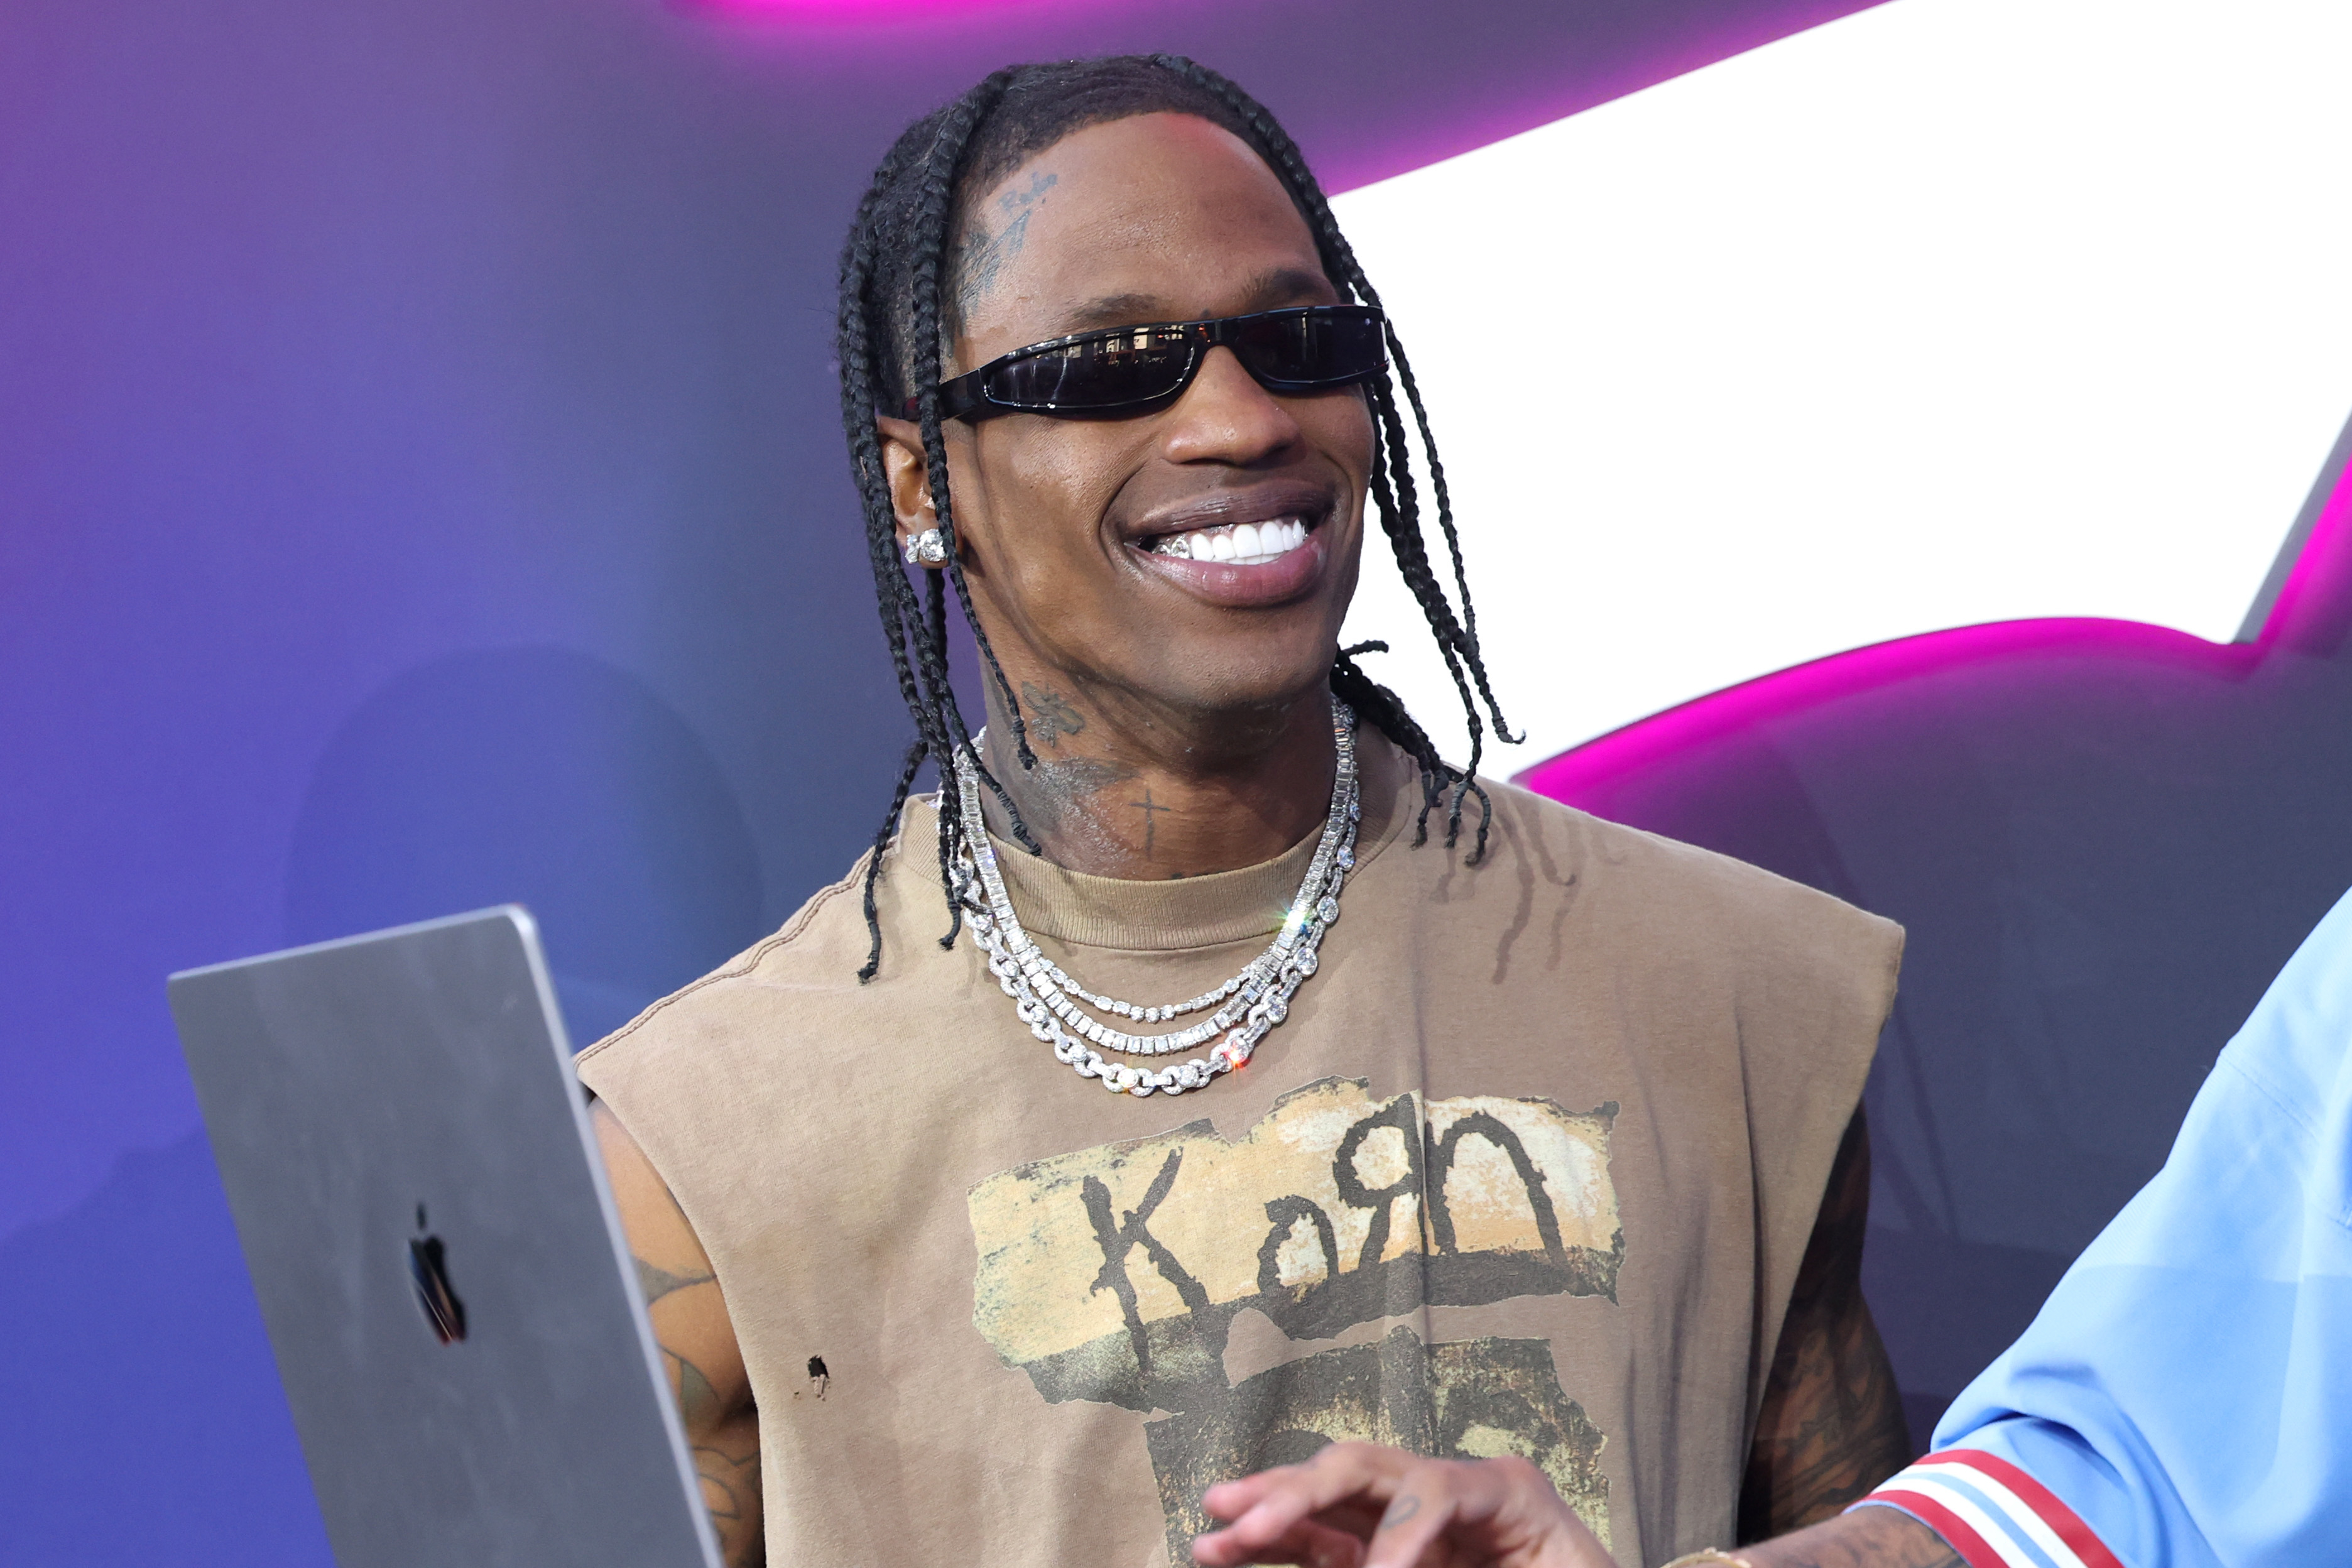 Travis Scott smiling, wearing a graphic tee and layered necklaces, stands next to a man with a laptop